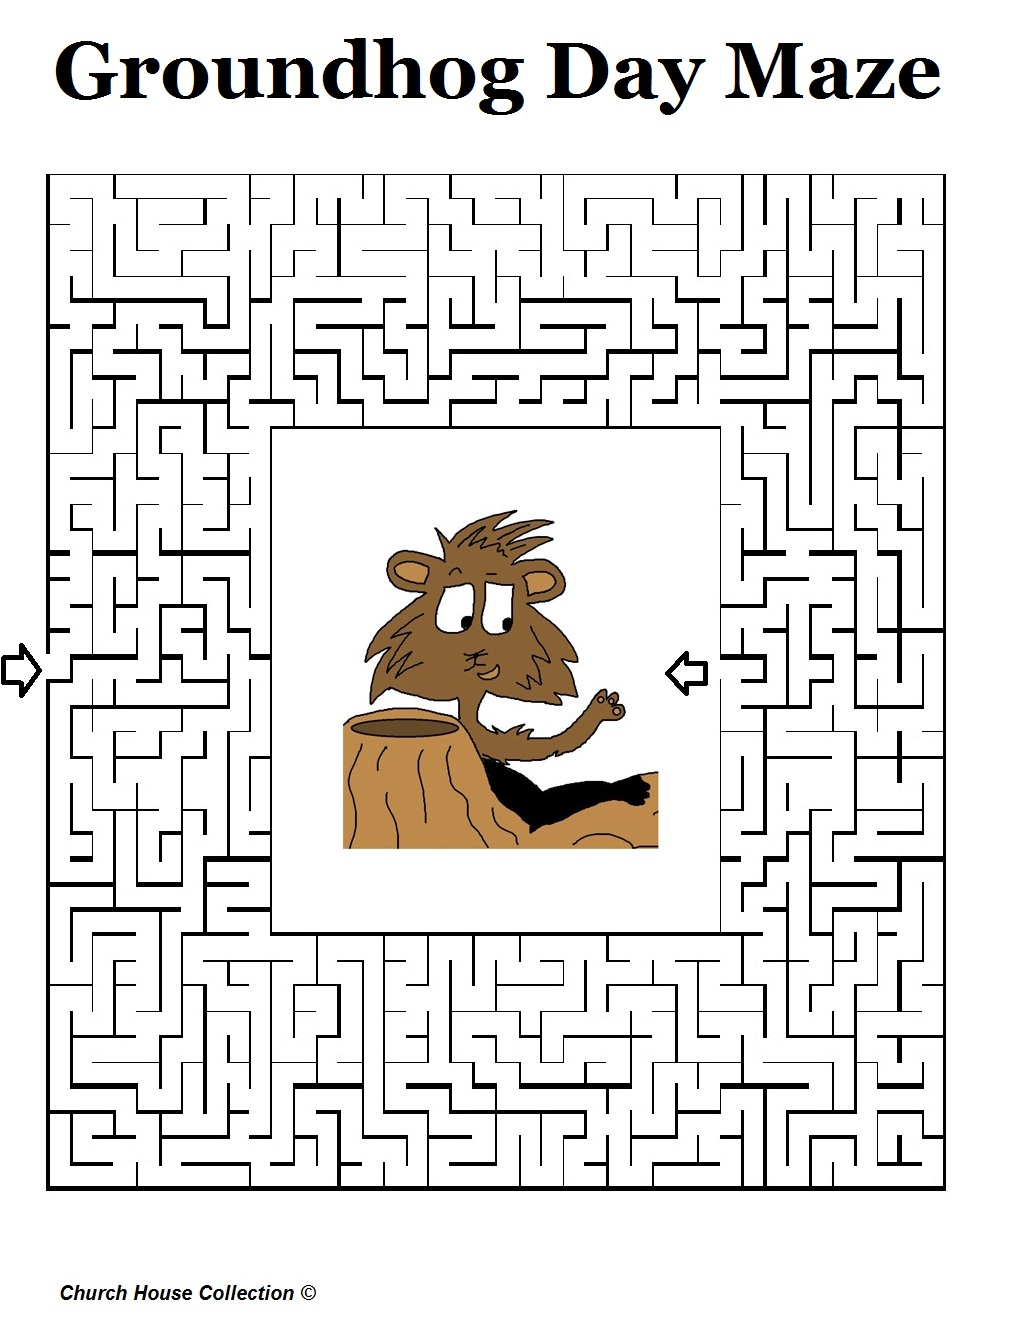 Church house collection blog groundhog day mazes for school teachers